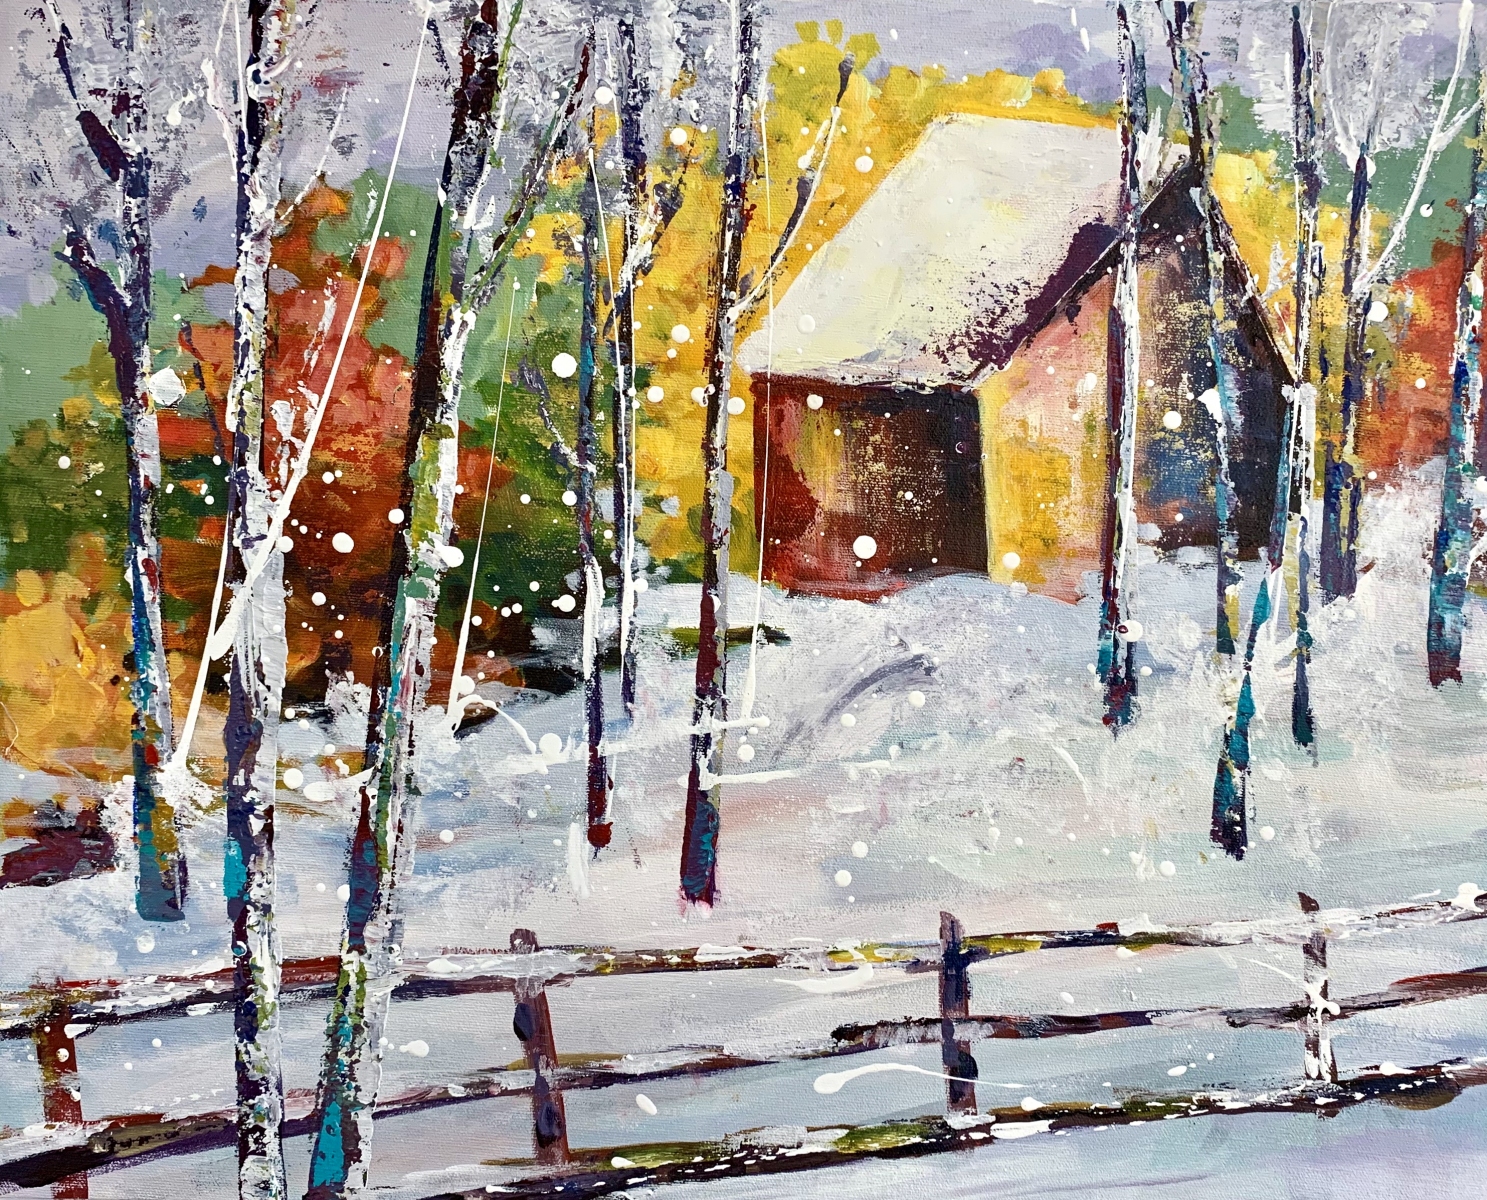 CABIN IN THE SNOW